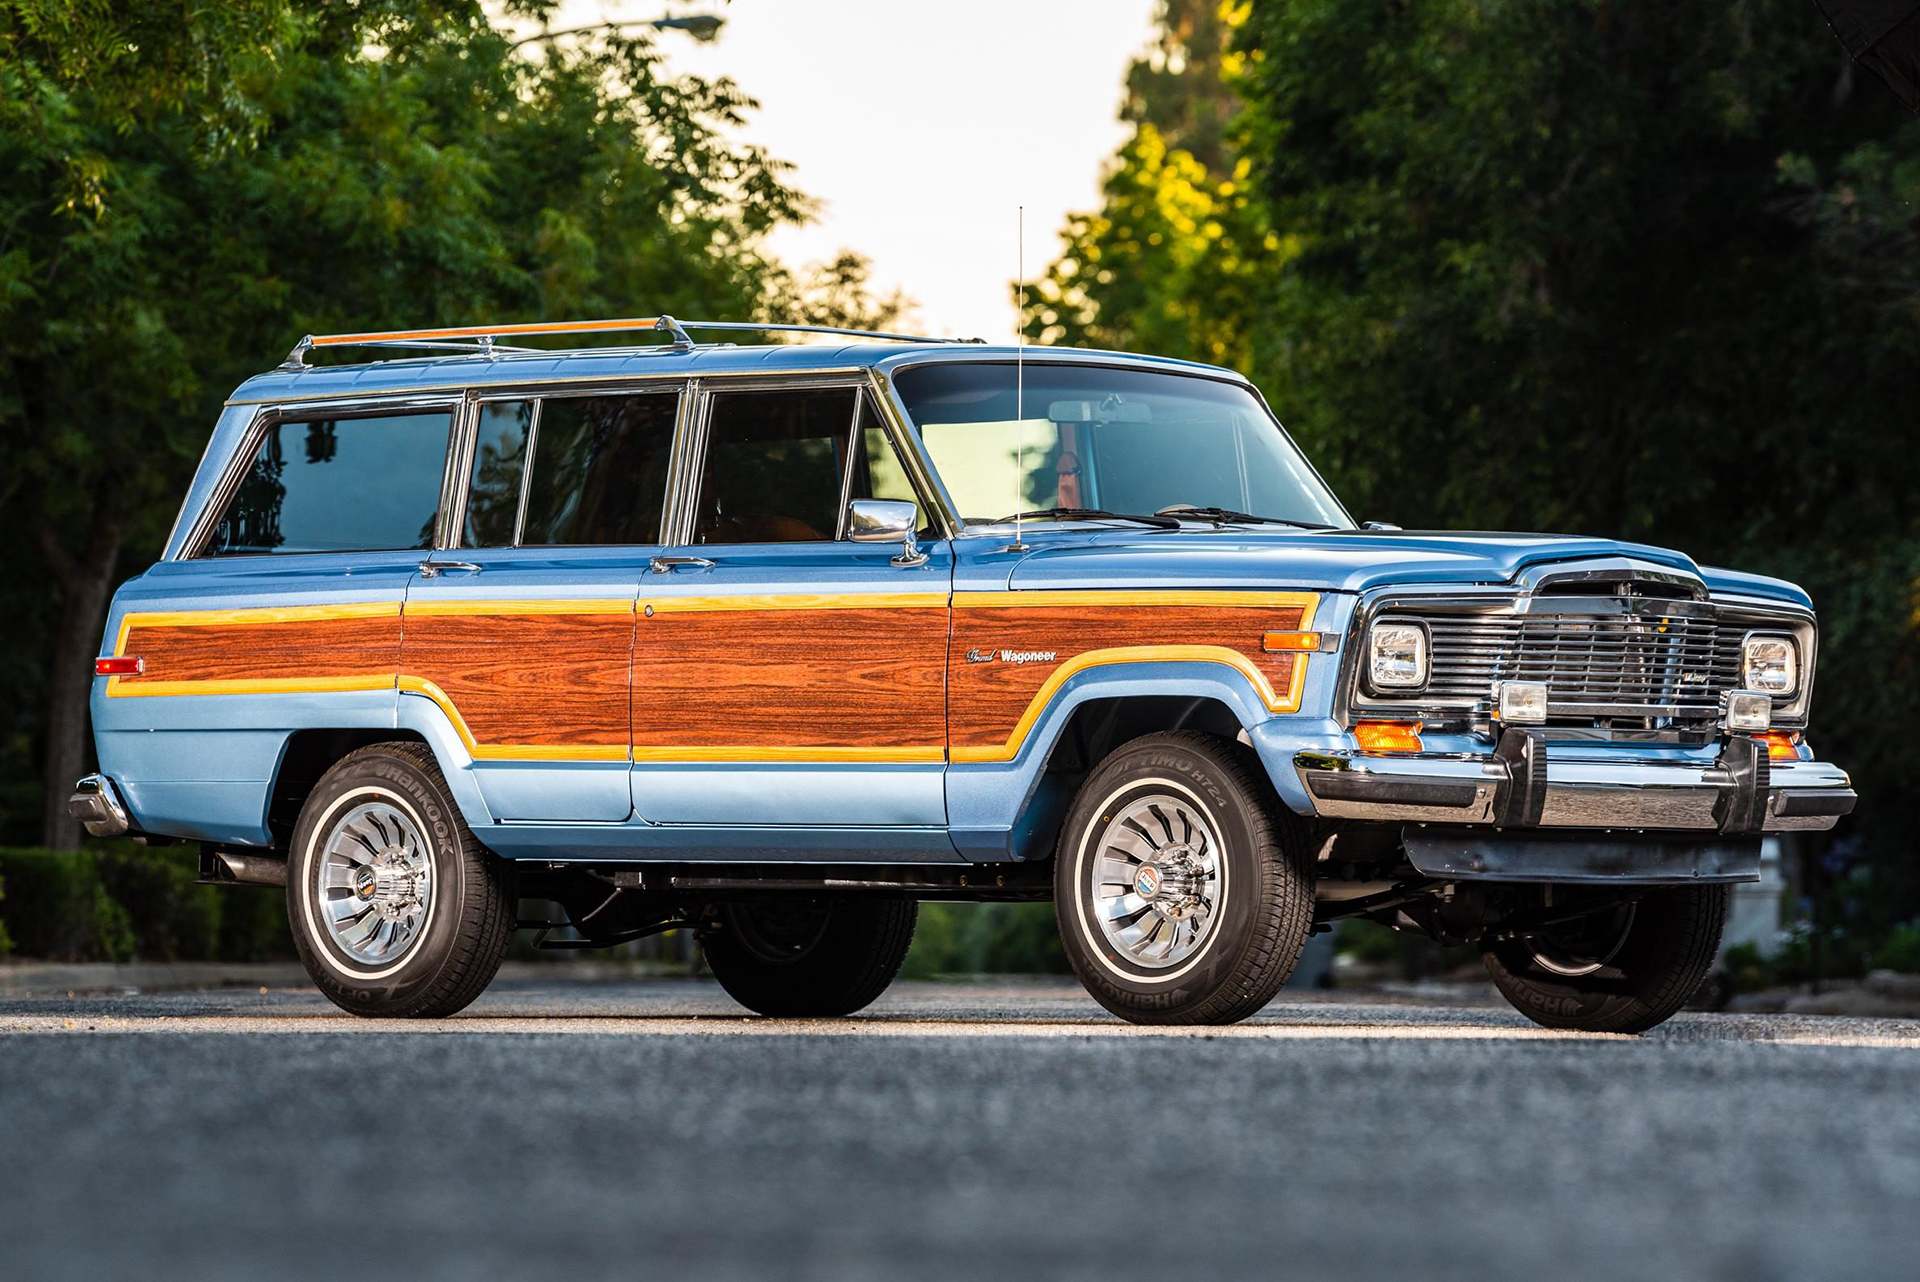 LS swapped 1984 Jeep Grand Wagoneer Restoration Is Up For Auction 